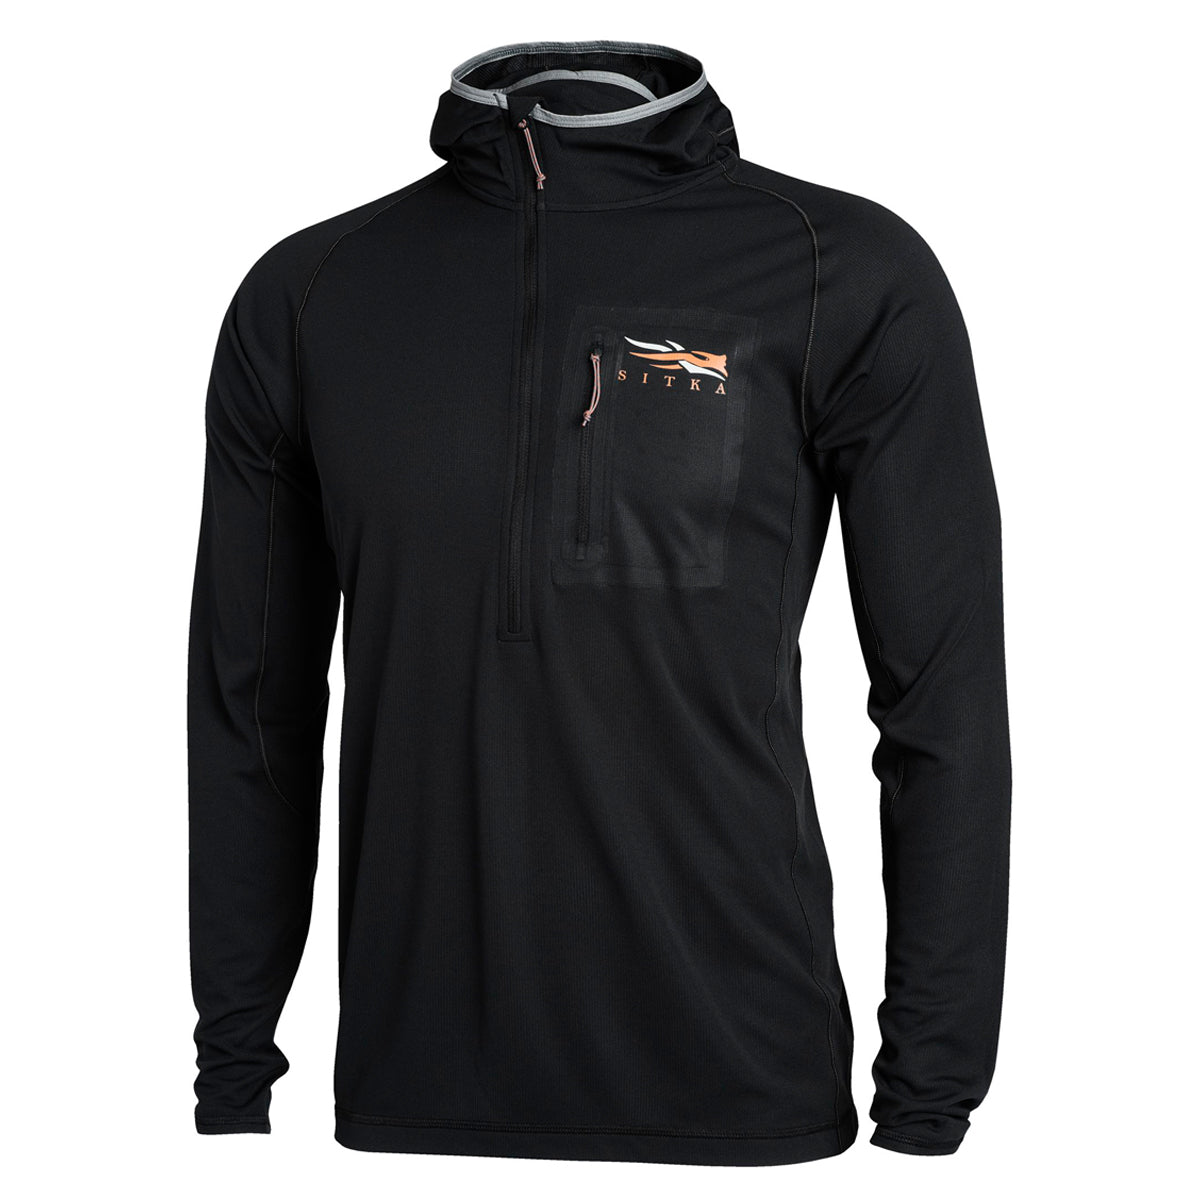 Sitka Core Lightweight Hoody by Sitka | Apparel - goHUNT Shop